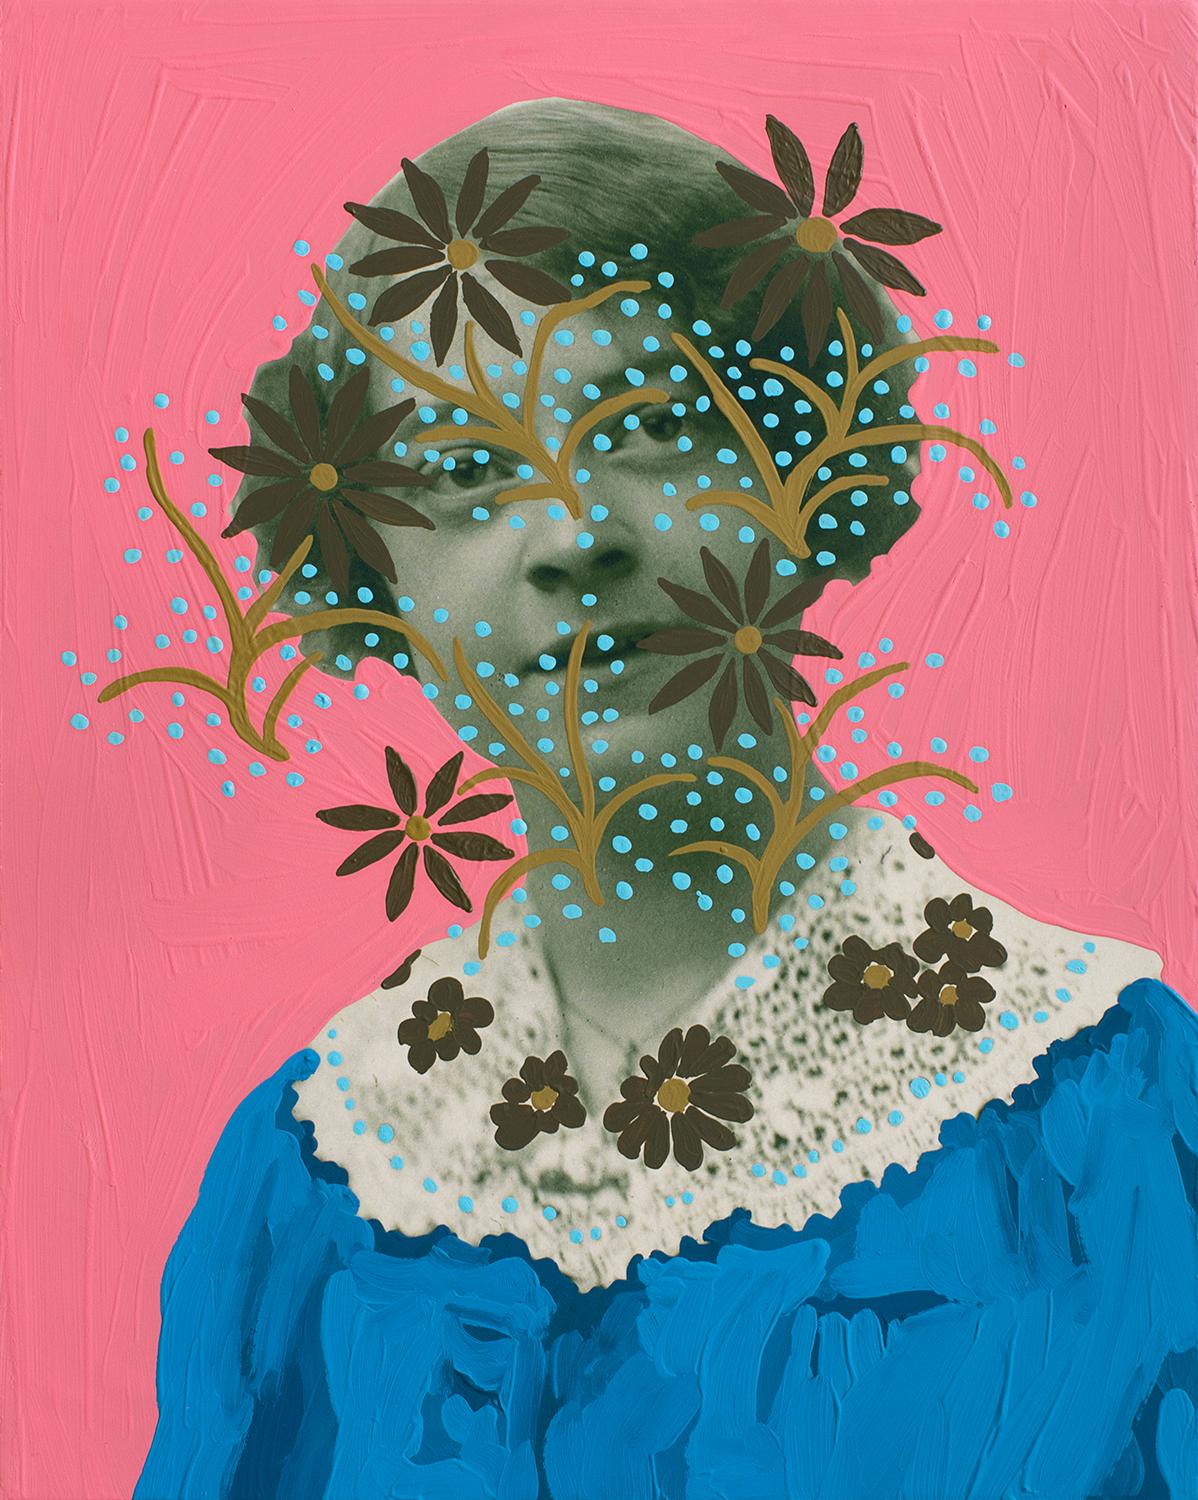 Untitled (Woman with Lace and Flowers) - Mixed Media Art by Daisy Patton